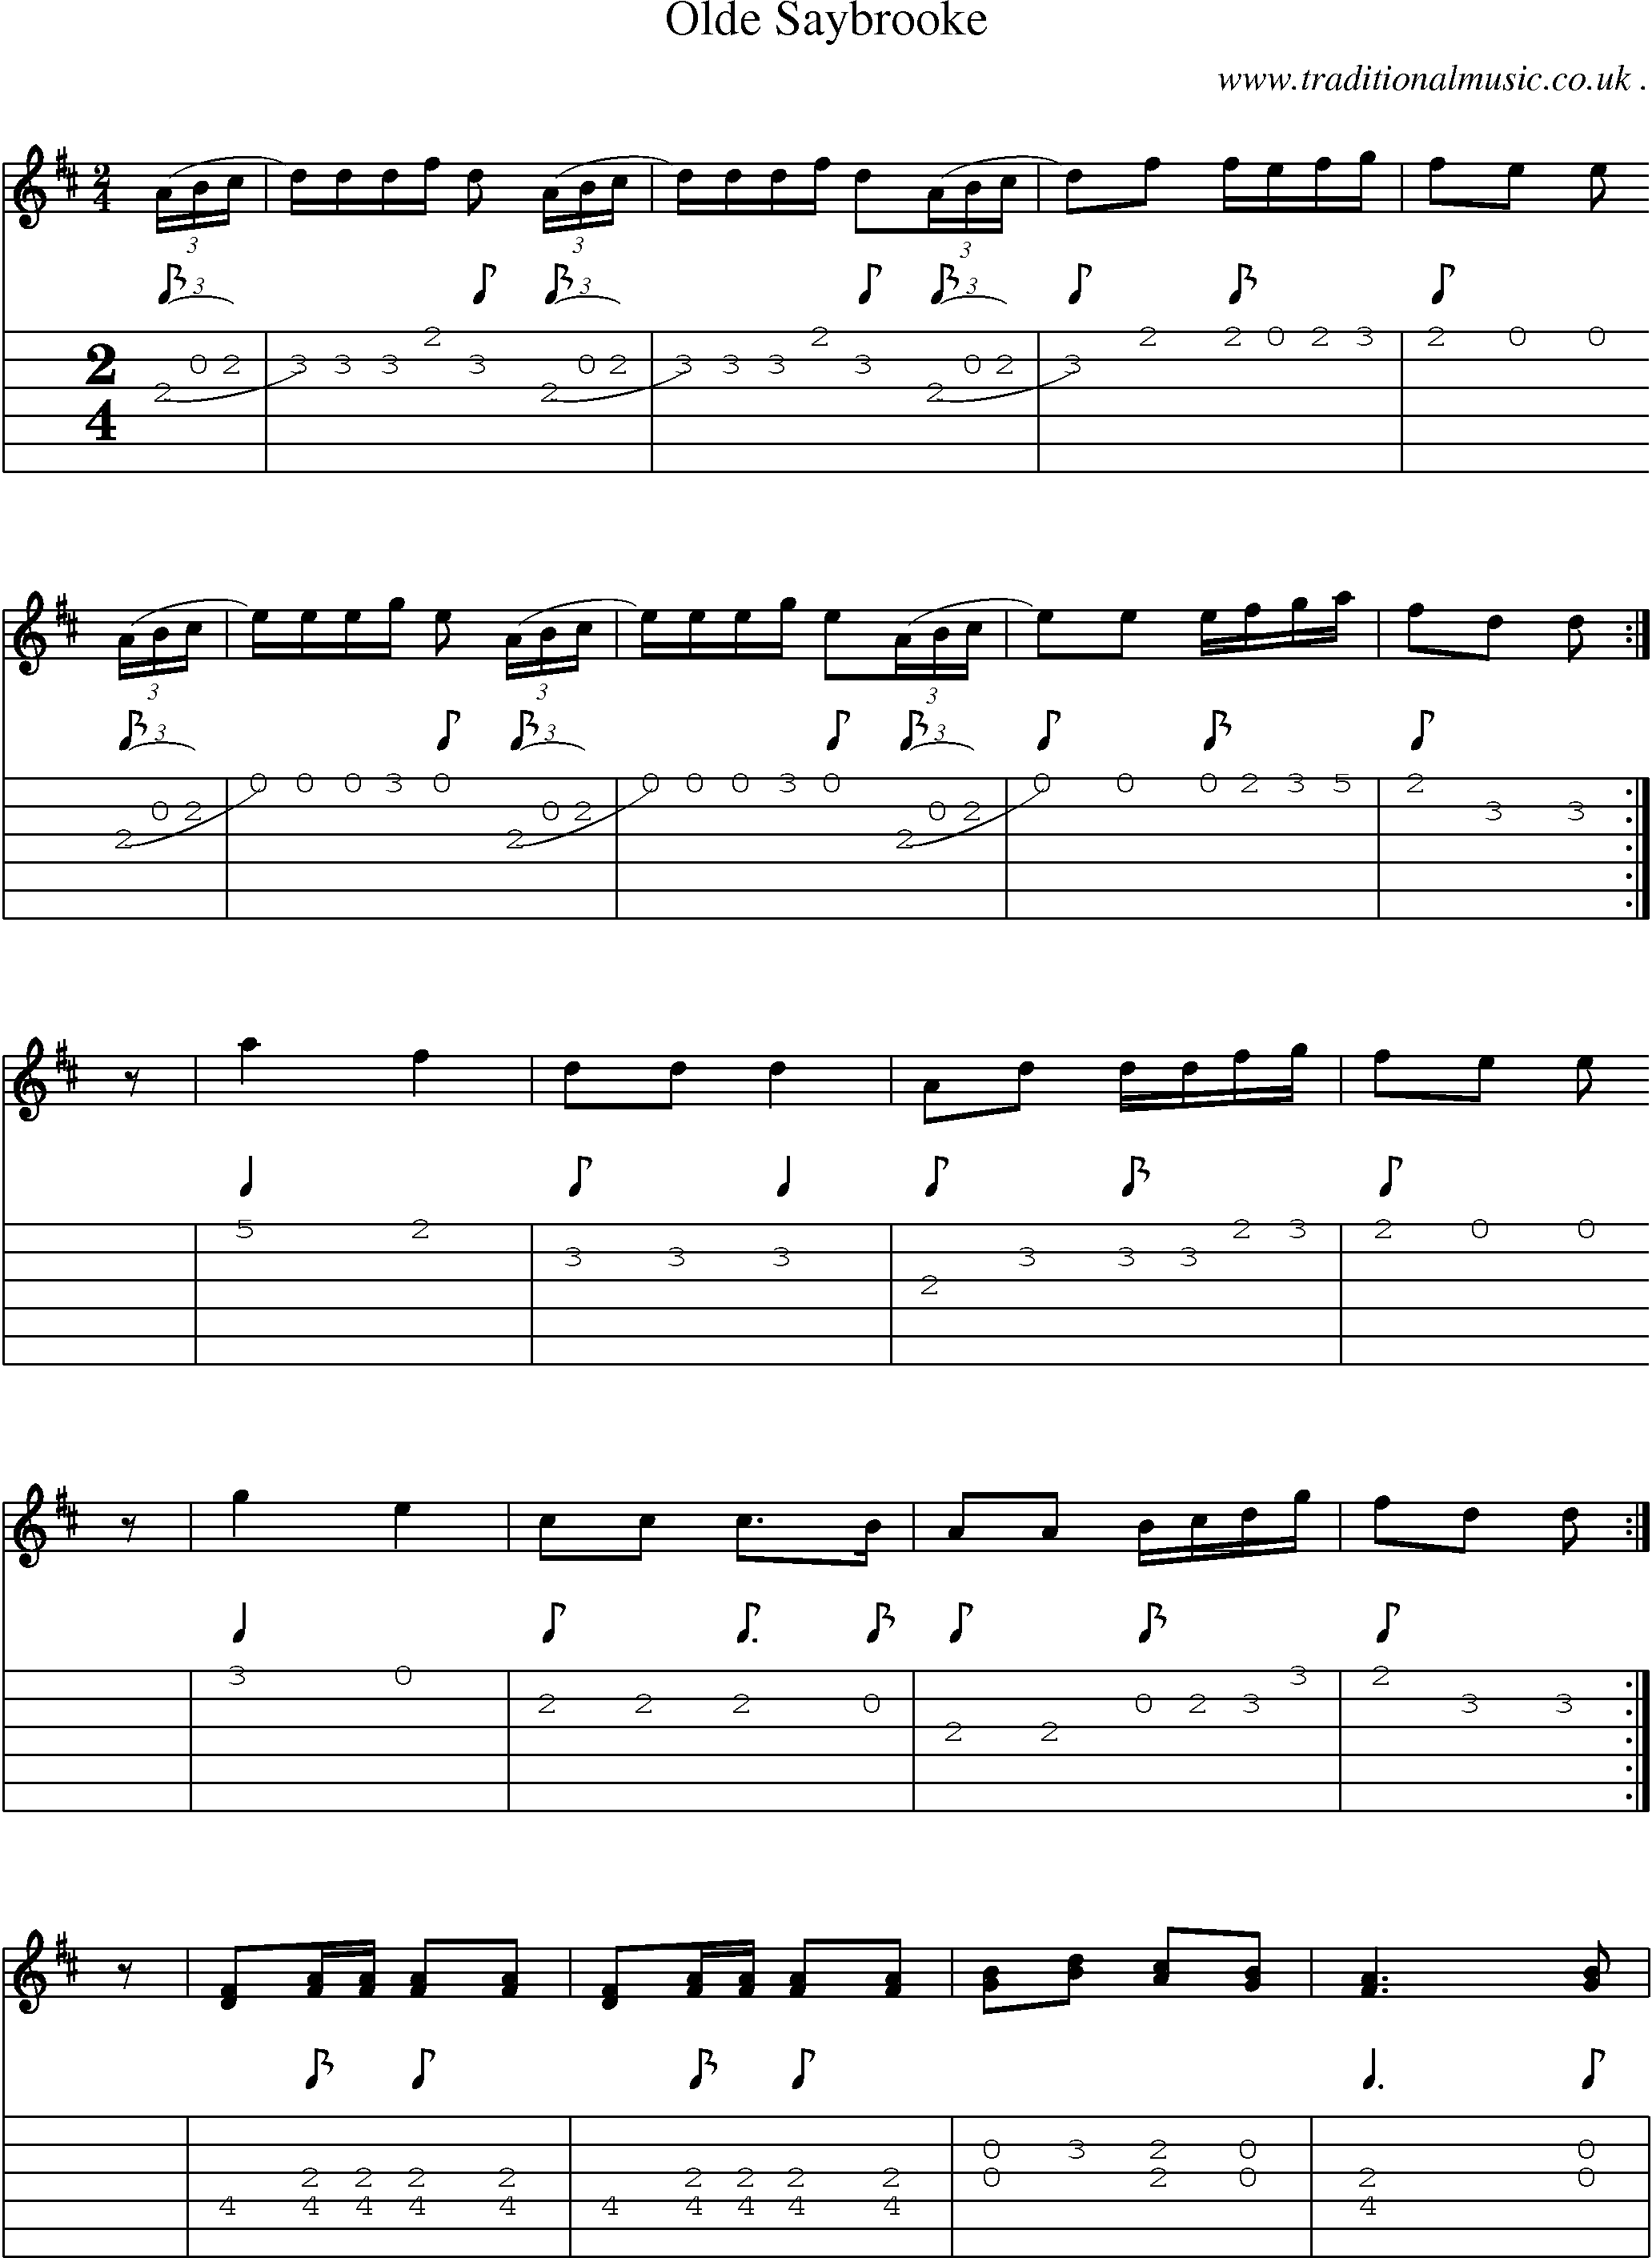 Music Score and Guitar Tabs for Olde Saybrooke